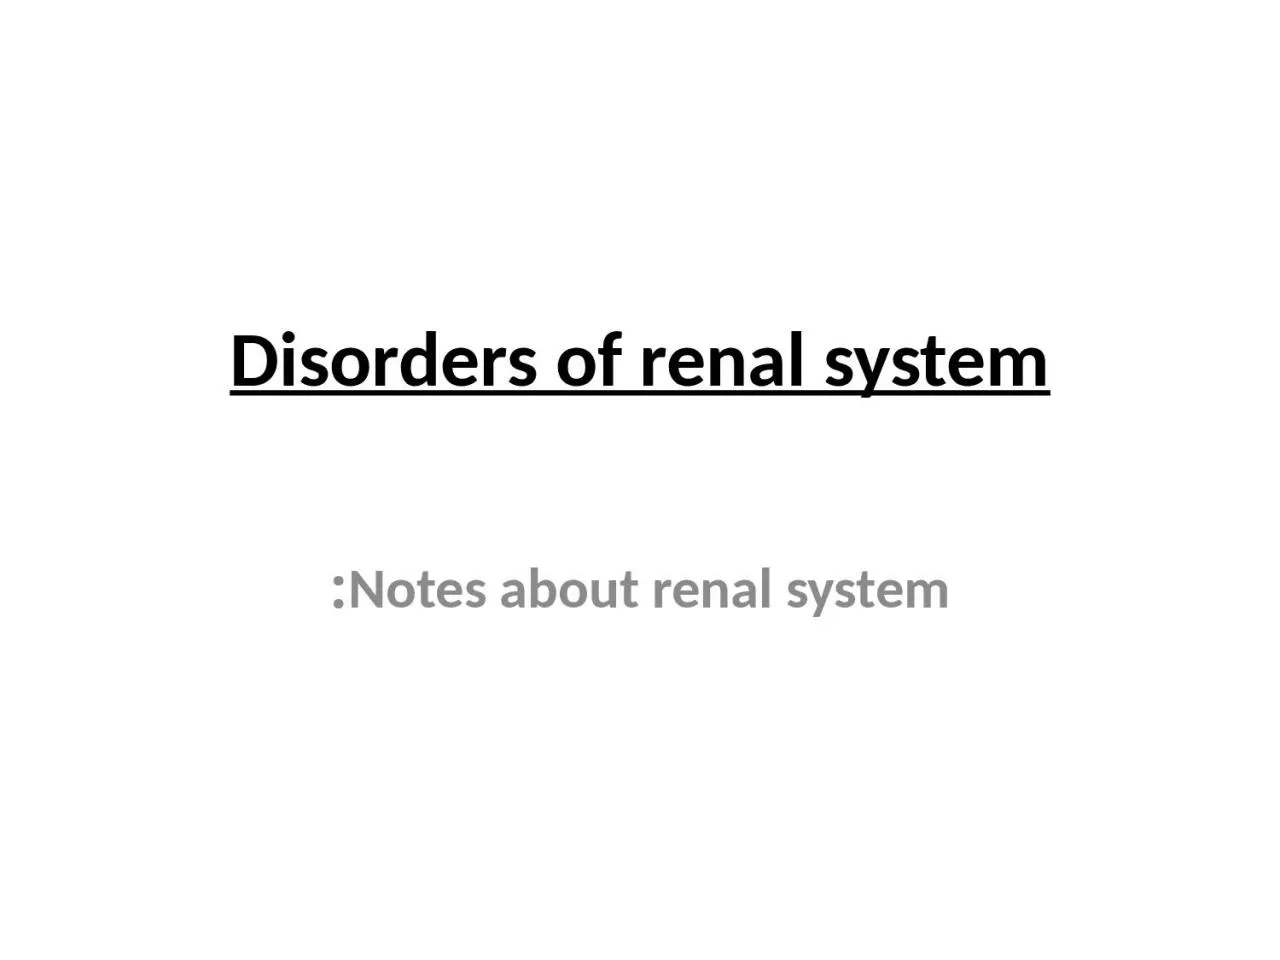 Disorders of renal system